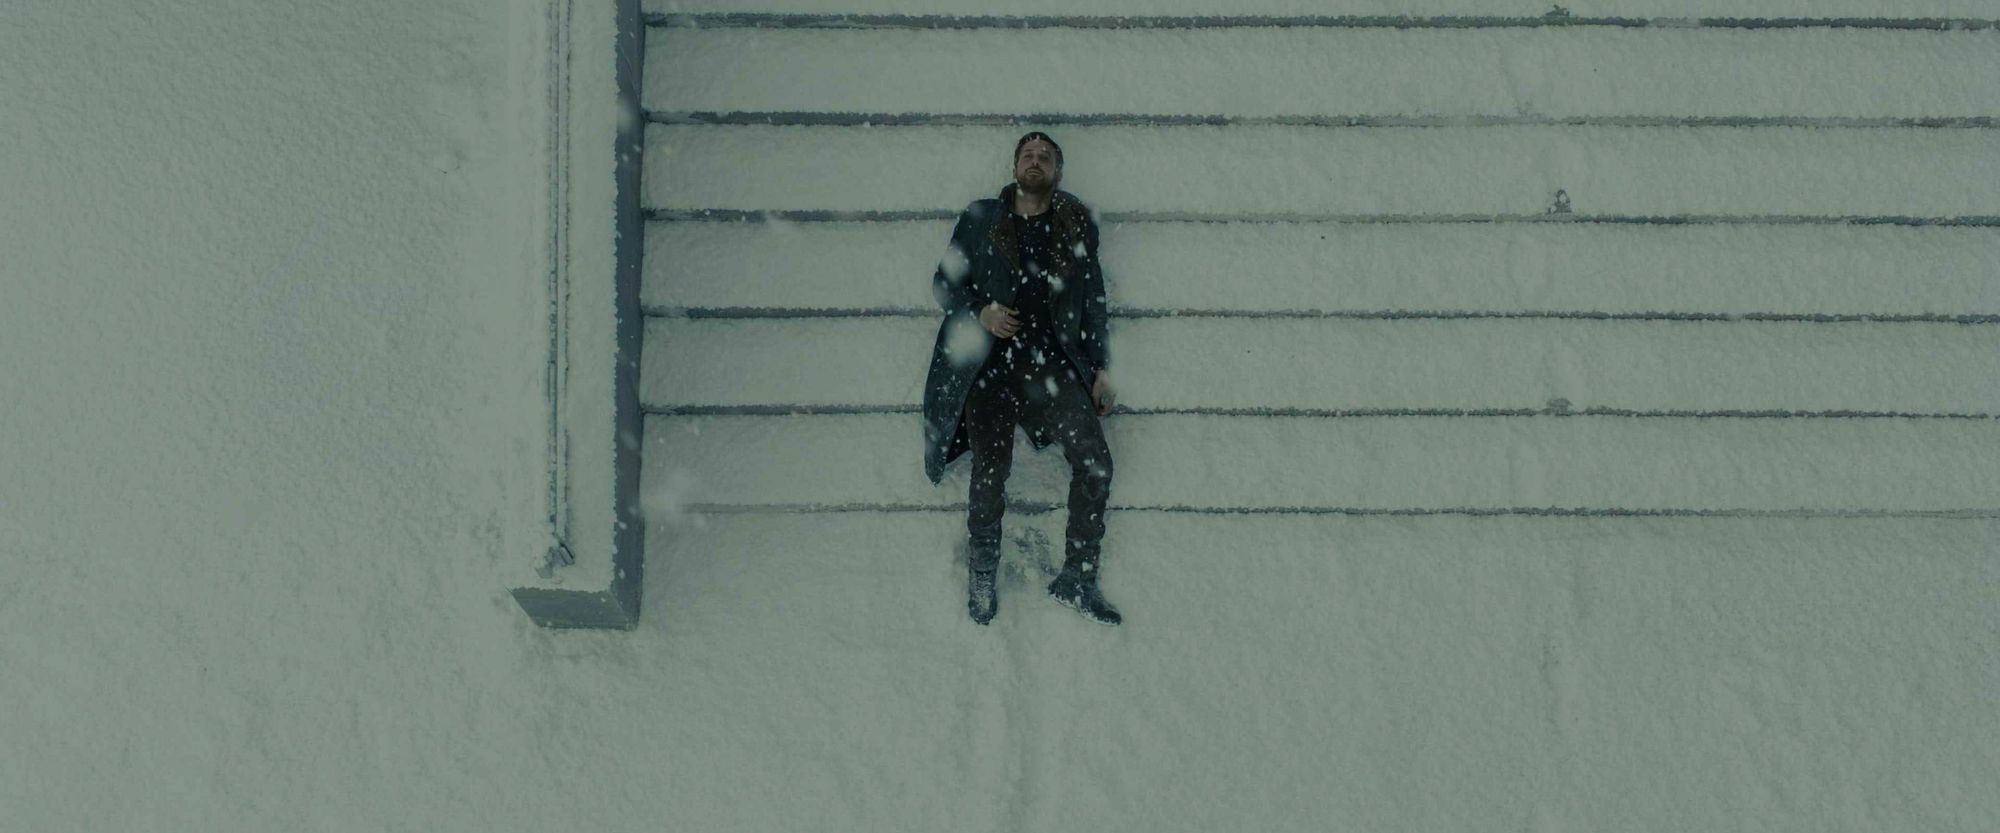 Man covered in snow lying on stairs